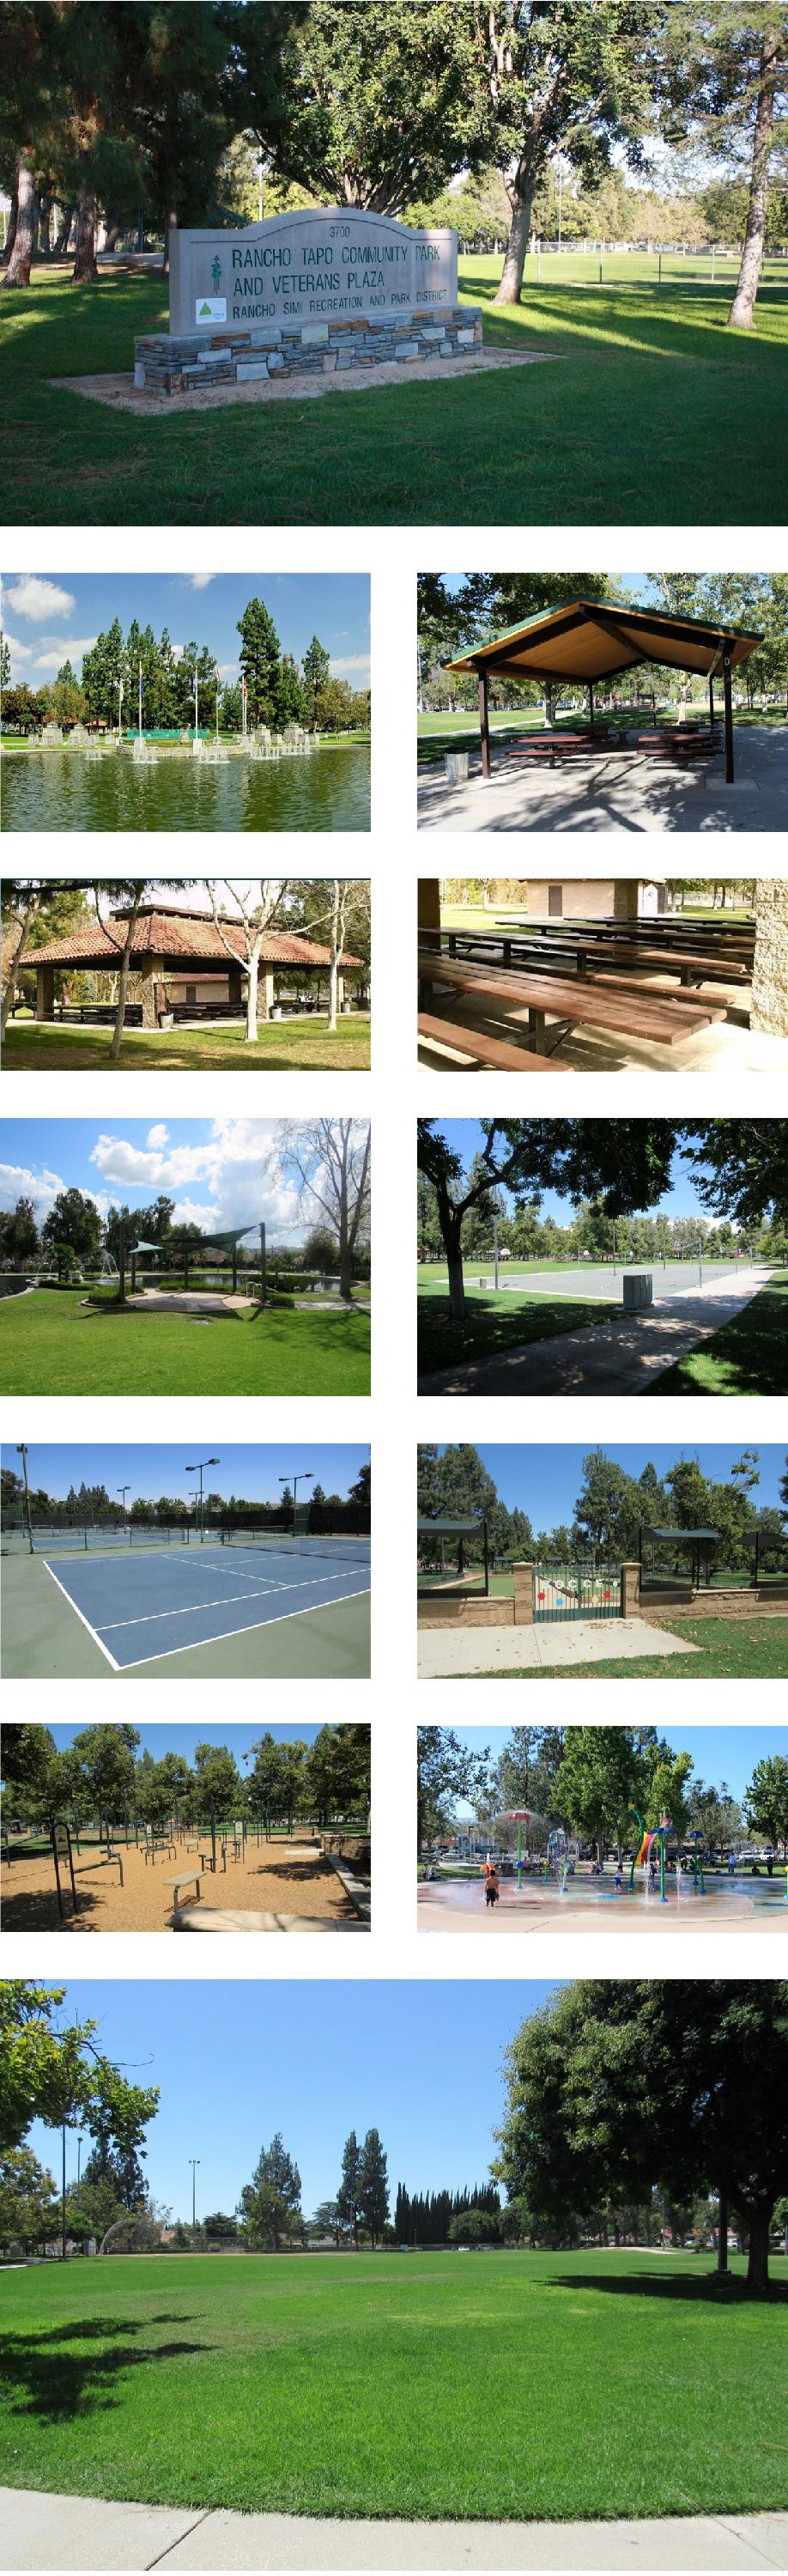 Rancho Tapo Comm Park Collage